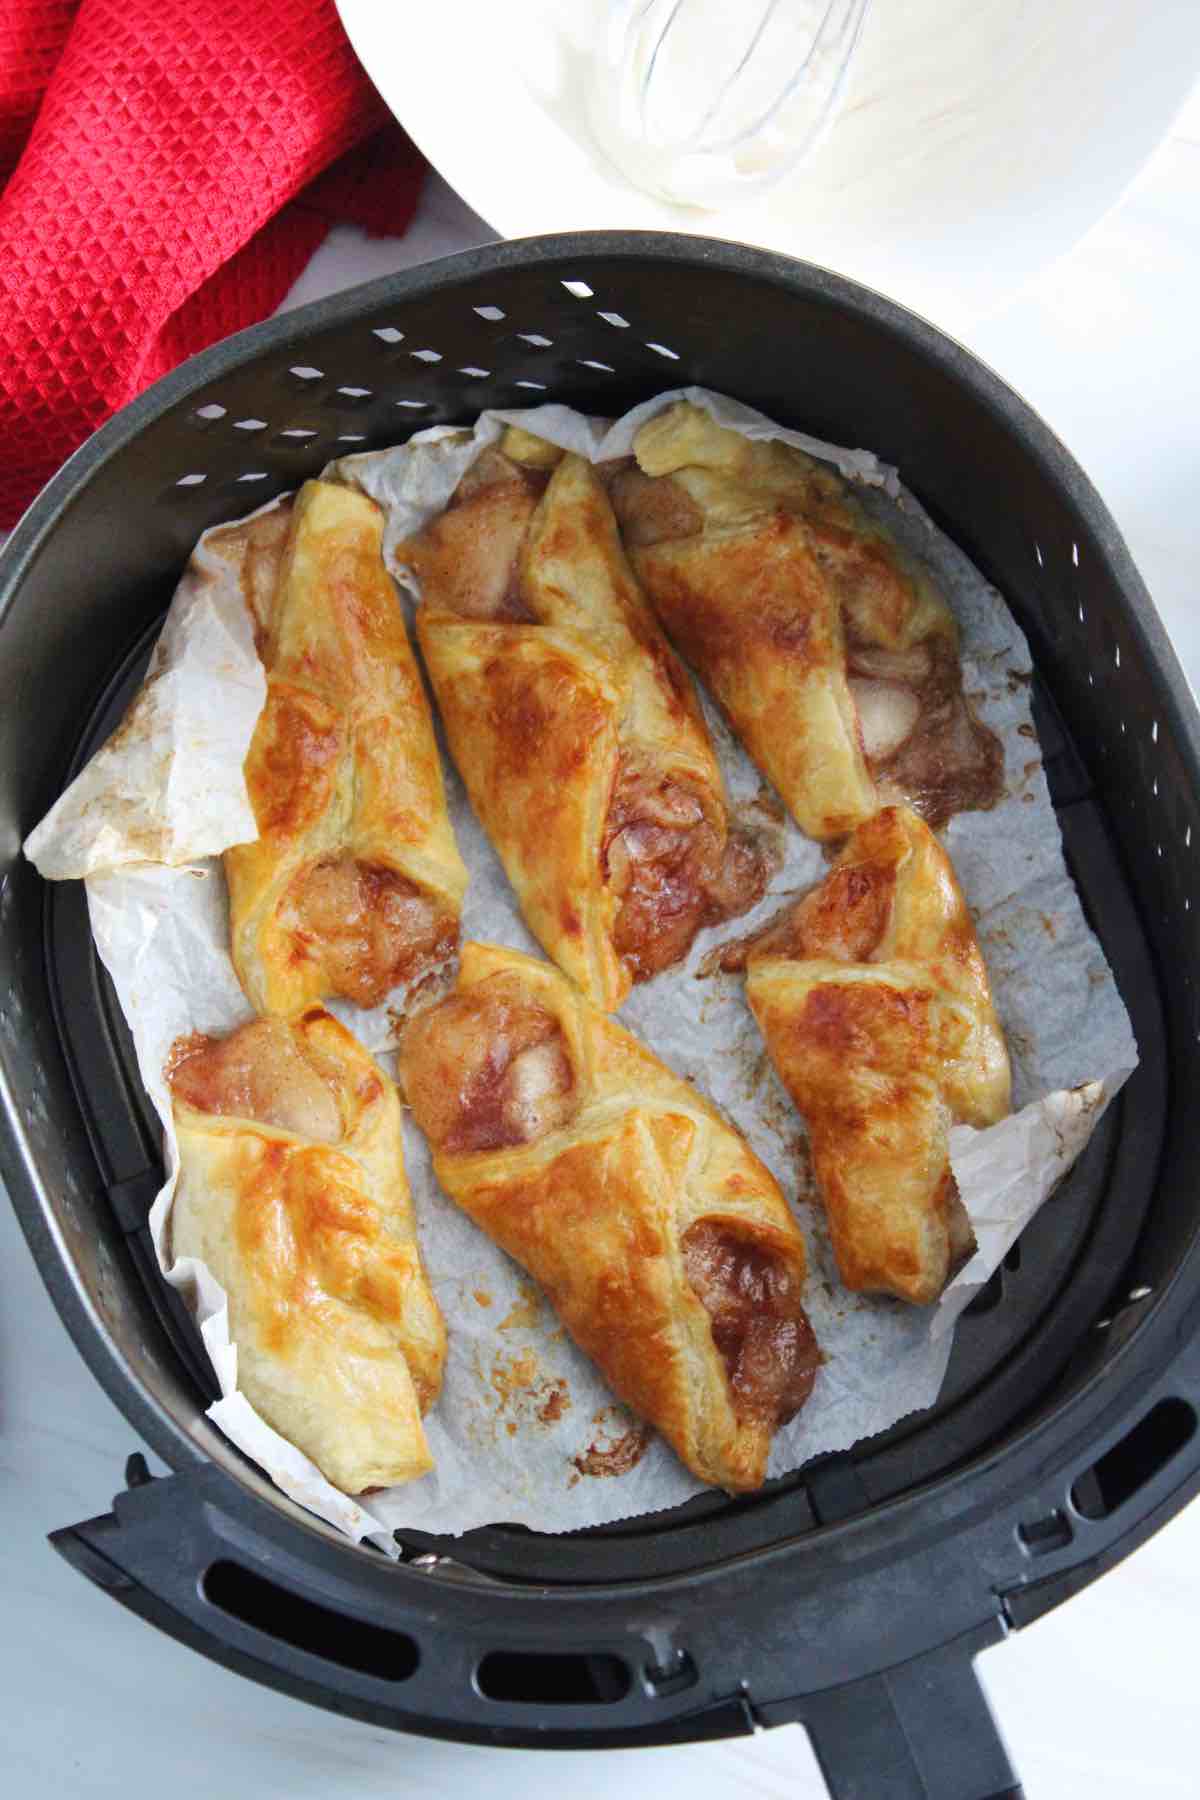 Easy air fryer apple turnovers made with puff pastry.